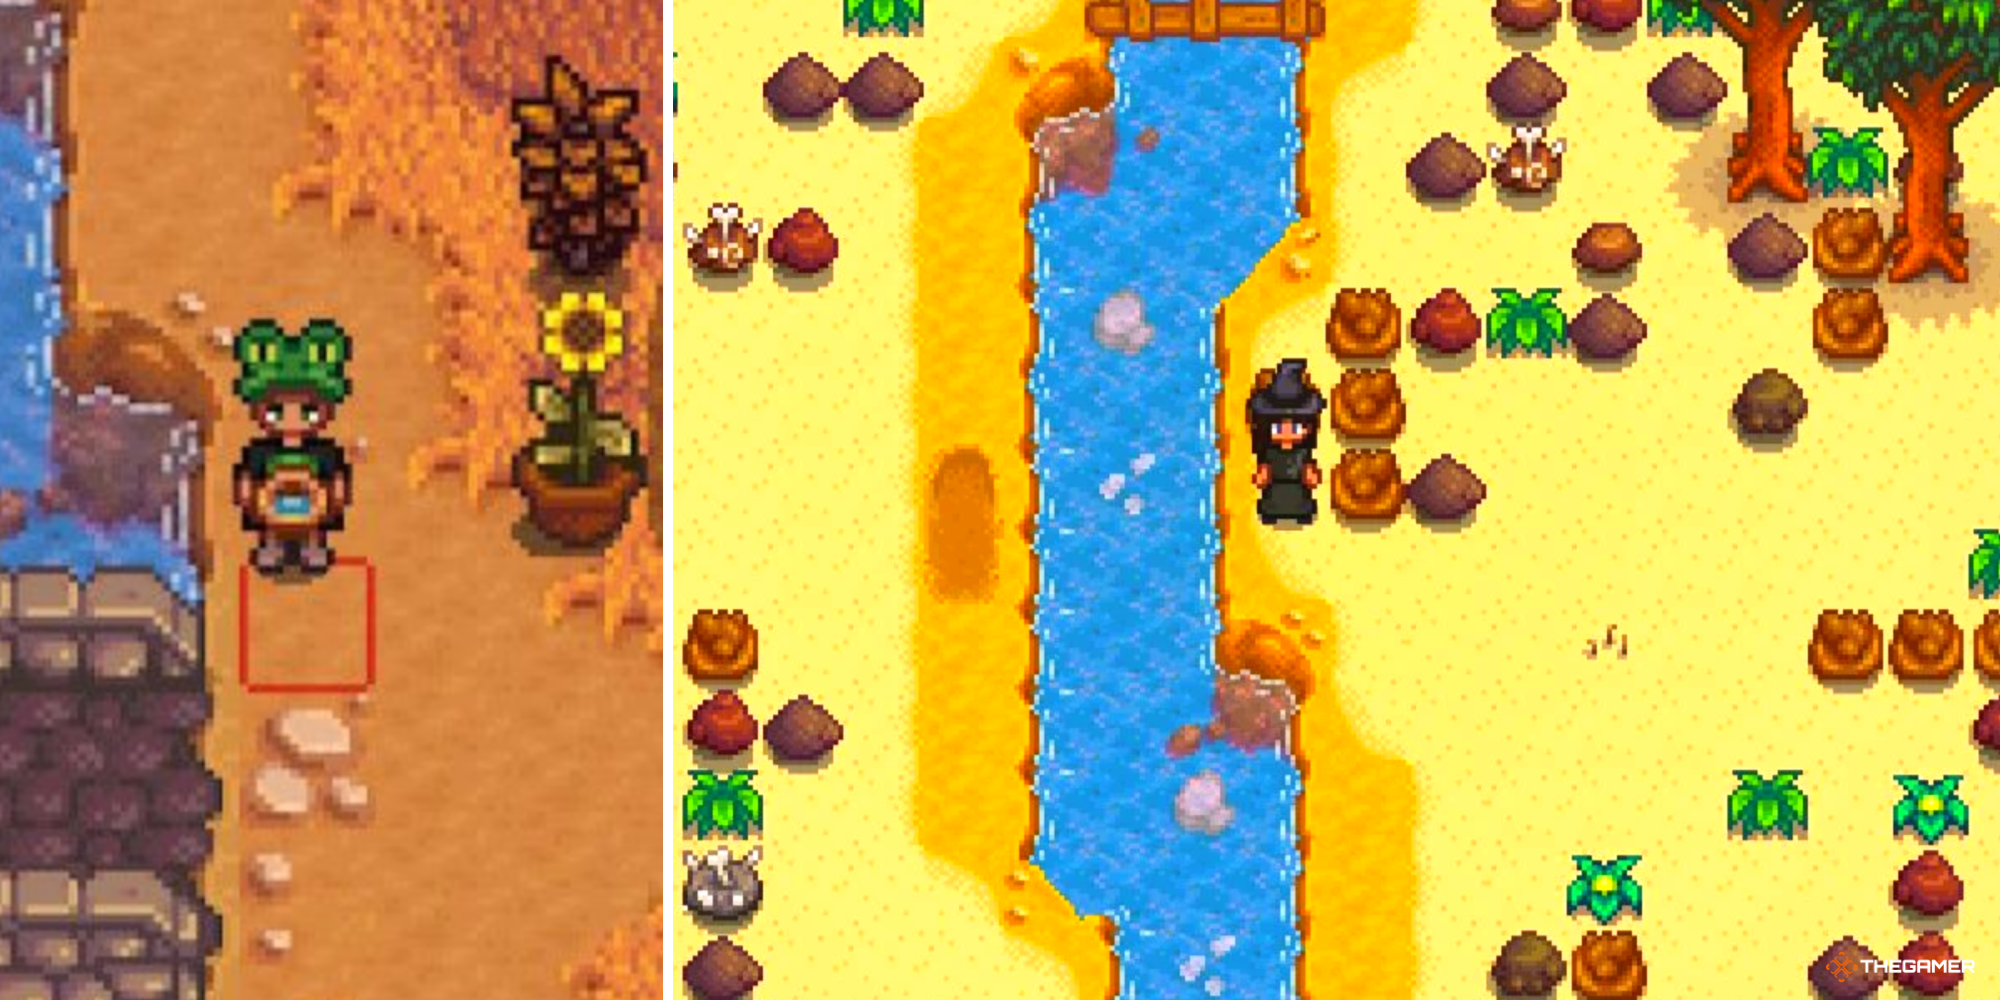 Stardew Valley - Player Panning on left, Player in the Dig Site on Ginger Island on right